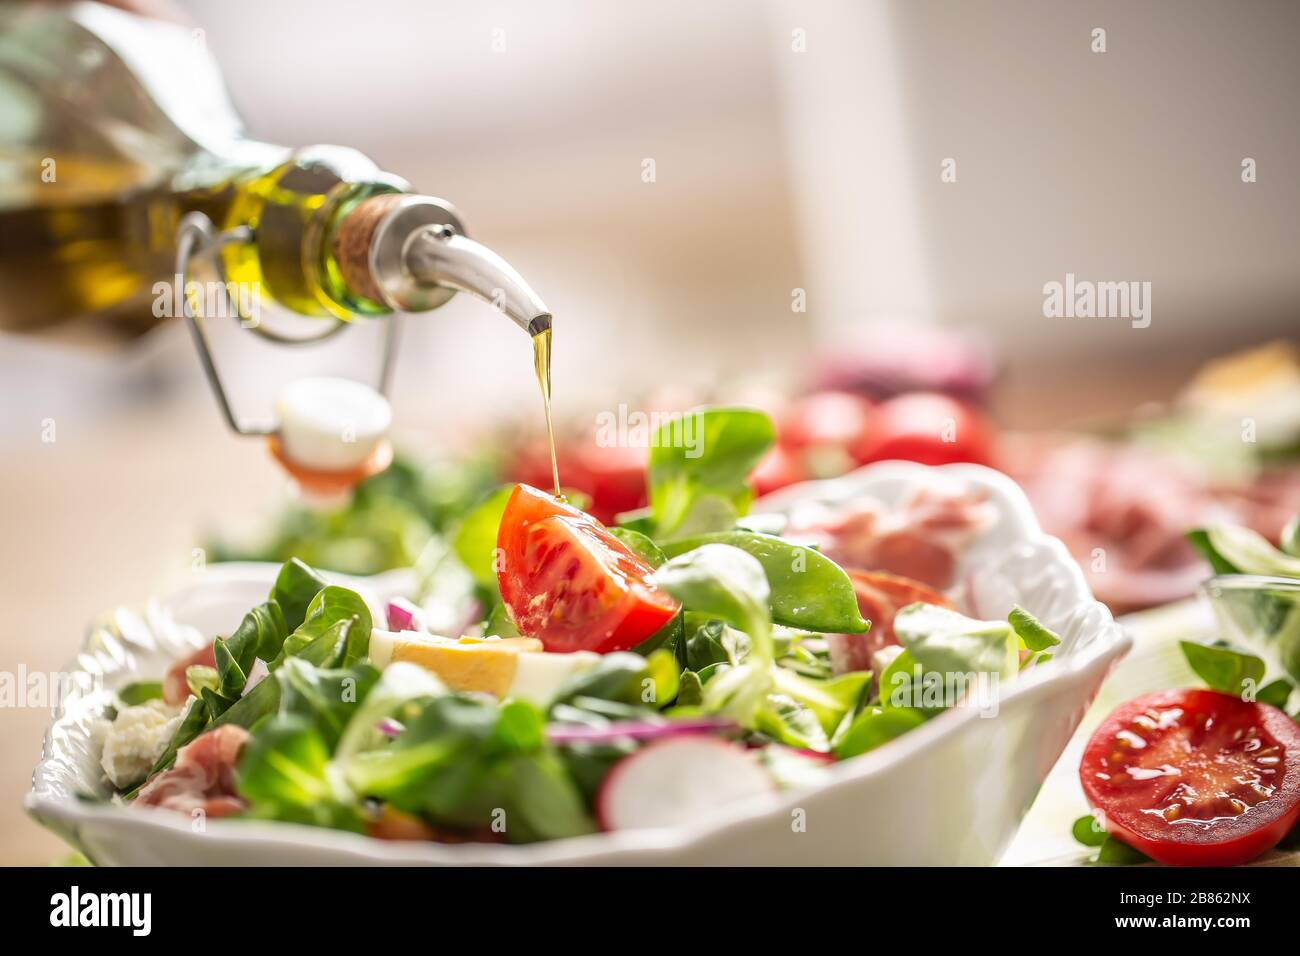 Bottle with olive oil pouring into salad Stock Photo